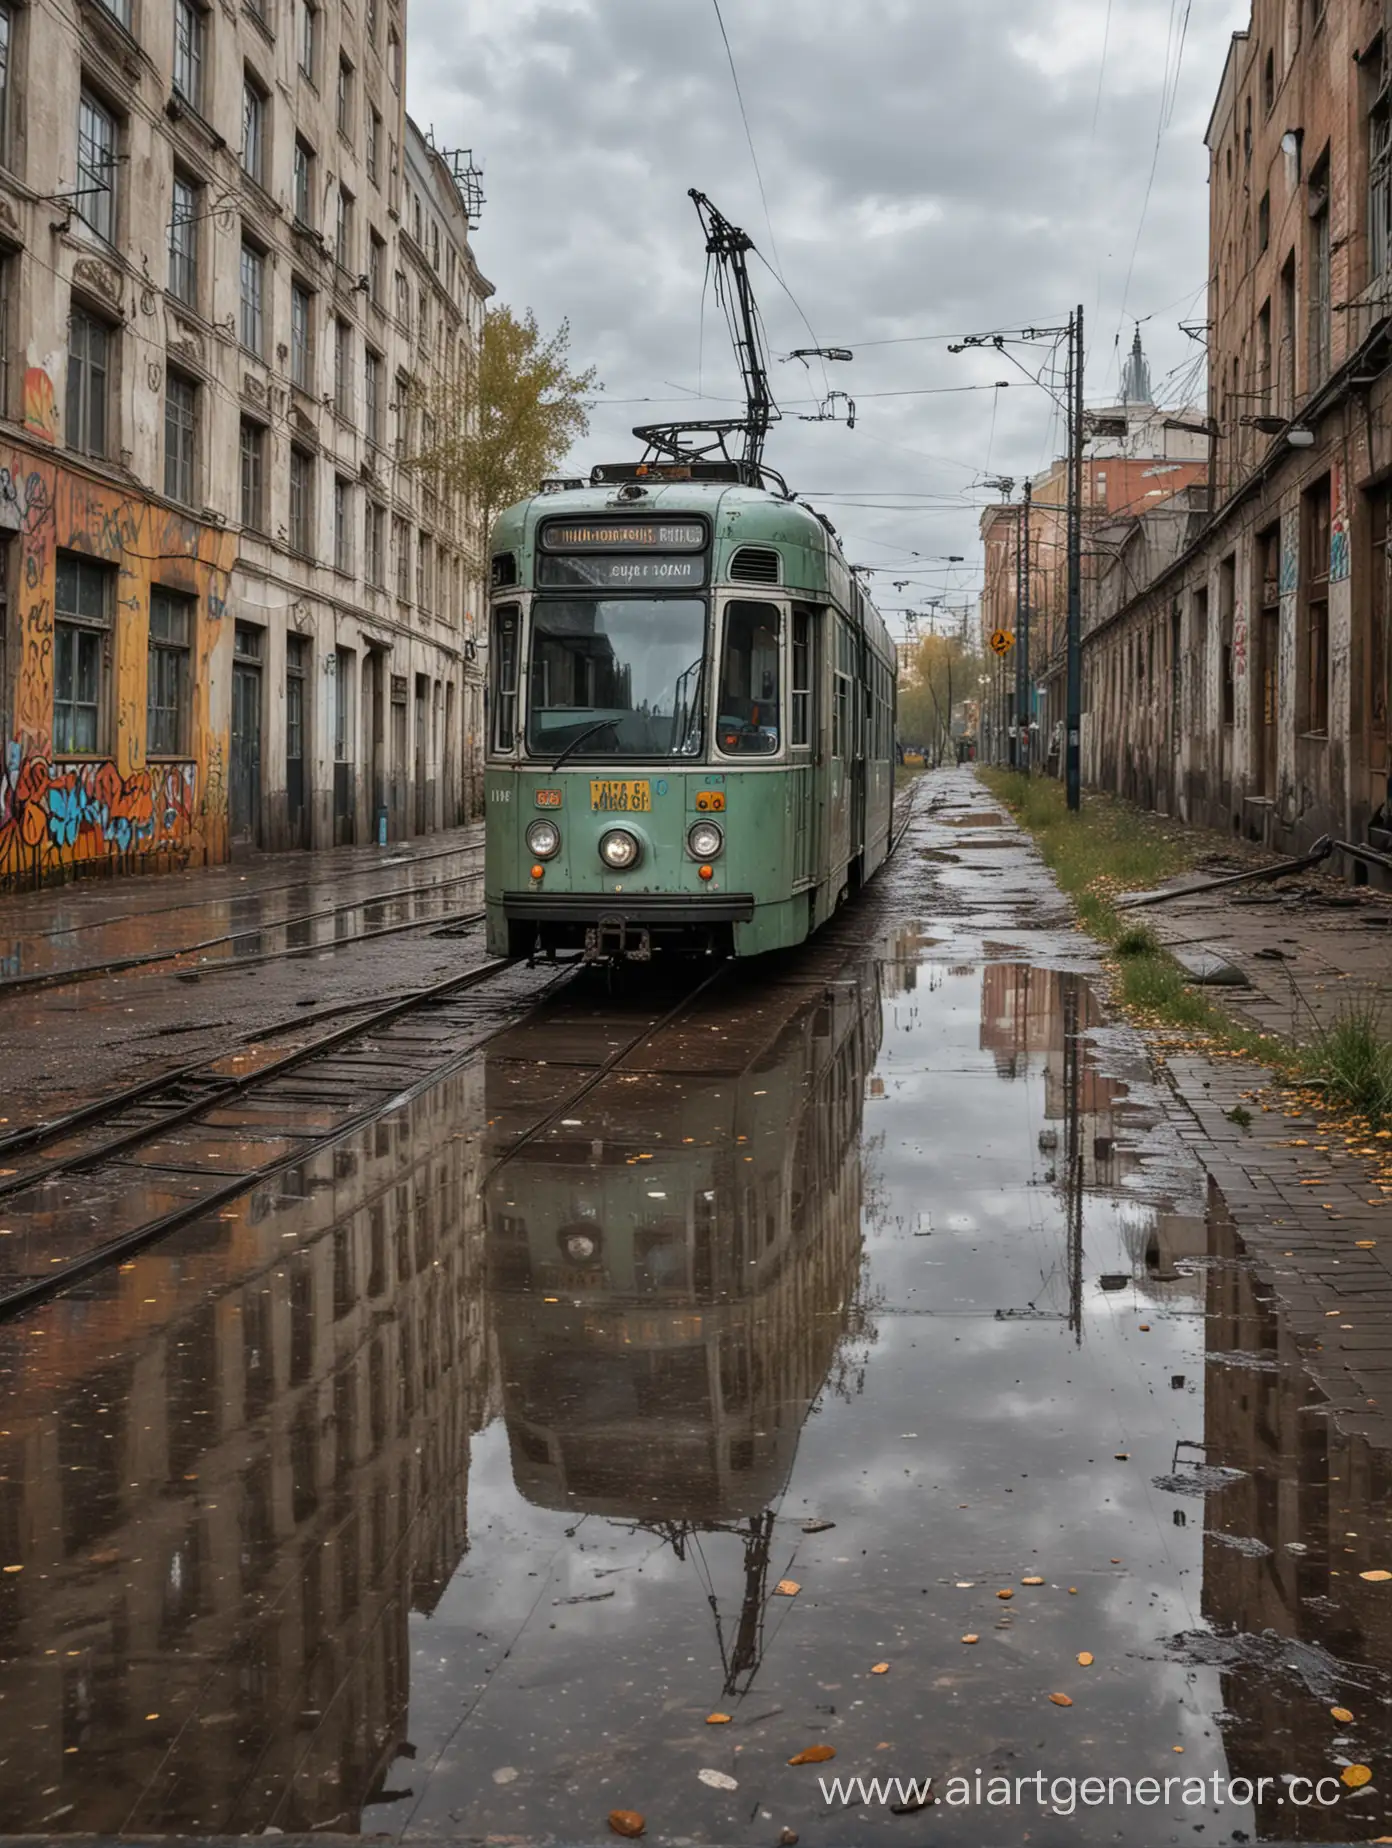 Abandoned-Tram-in-Moscow-Courtyard-with-Graffiti-Under-Autumn-Rain